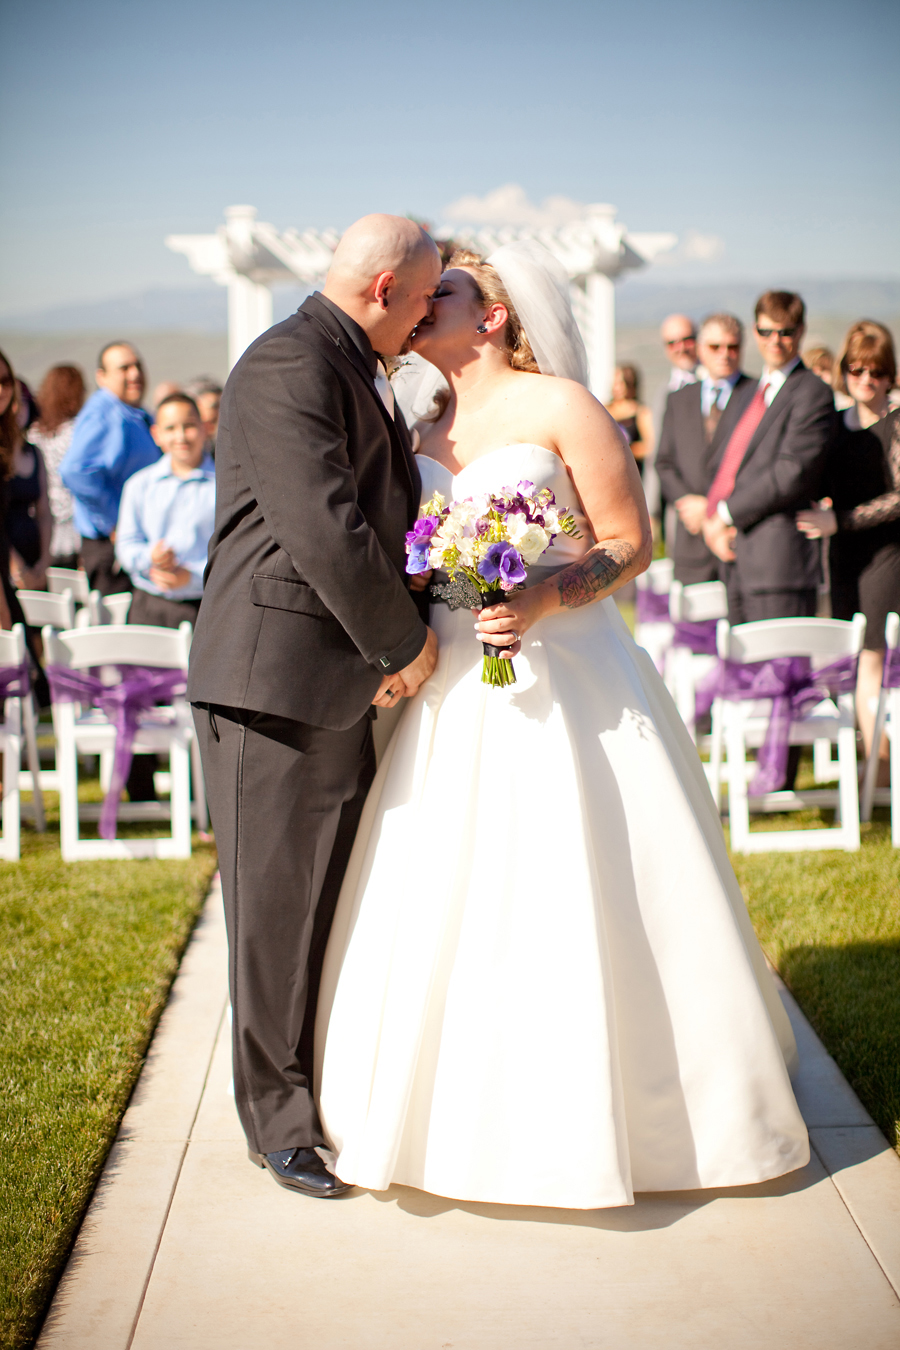 The bride and groom kiss at the end of the wedding aisle after getting married at Willow Heights Mansion.